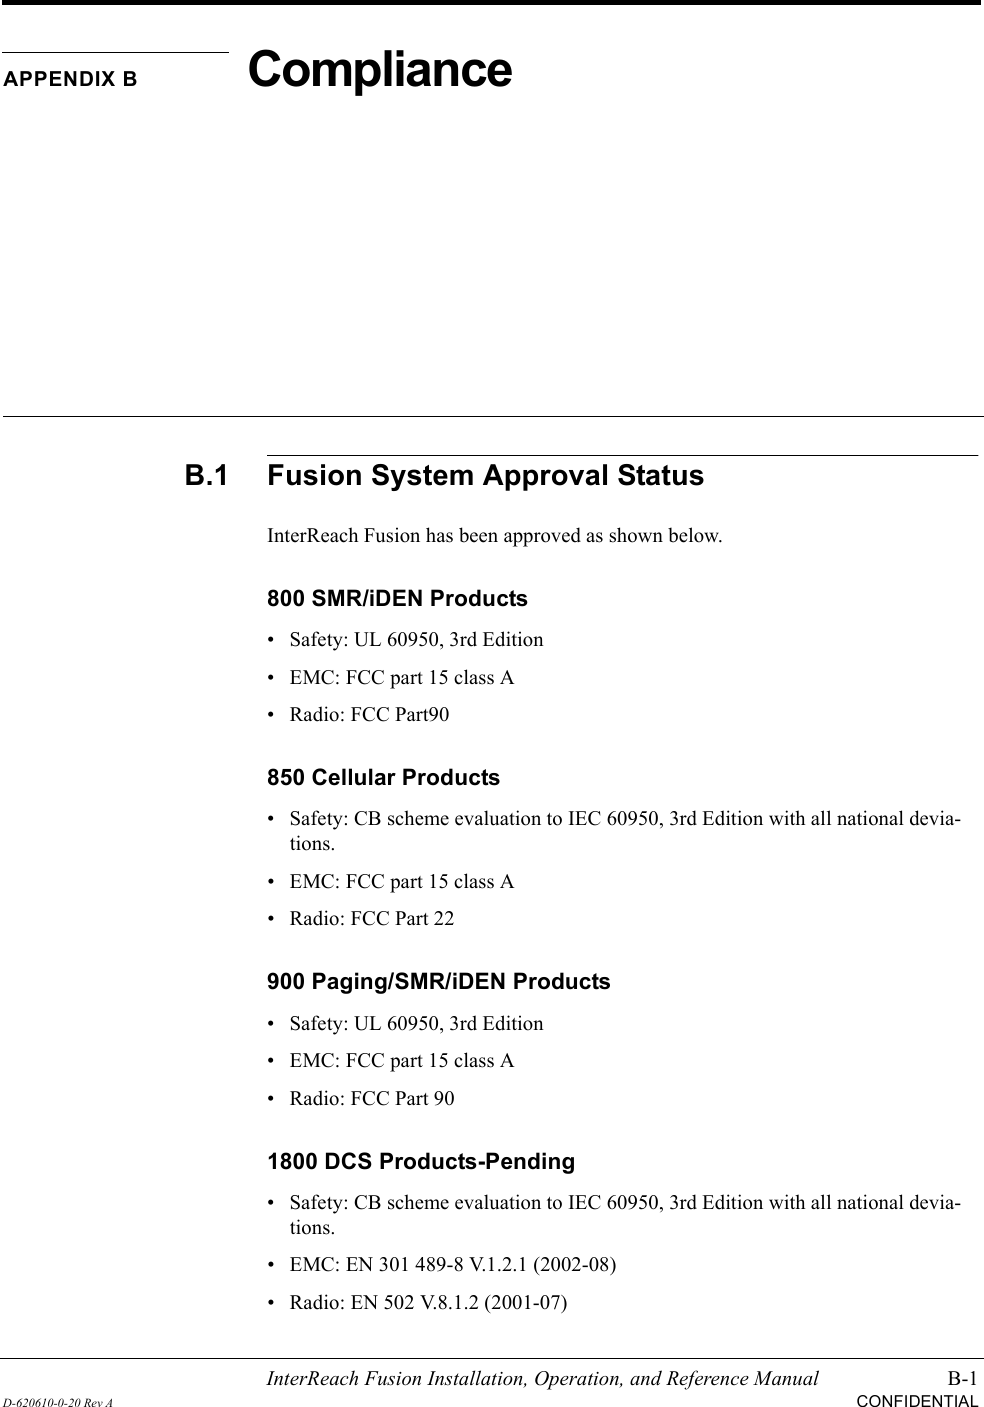 InterReach Fusion Installation, Operation, and Reference Manual B-1D-620610-0-20 Rev ACONFIDENTIALAPPENDIX BComplianceB.1 Fusion System Approval StatusInterReach Fusion has been approved as shown below.800 SMR/iDEN Products• Safety: UL 60950, 3rd Edition• EMC: FCC part 15 class A• Radio: FCC Part90850 Cellular Products• Safety: CB scheme evaluation to IEC 60950, 3rd Edition with all national devia-tions.• EMC: FCC part 15 class A• Radio: FCC Part 22900 Paging/SMR/iDEN Products• Safety: UL 60950, 3rd Edition• EMC: FCC part 15 class A• Radio: FCC Part 901800 DCS Products-Pending• Safety: CB scheme evaluation to IEC 60950, 3rd Edition with all national devia-tions.• EMC: EN 301 489-8 V.1.2.1 (2002-08)• Radio: EN 502 V.8.1.2 (2001-07)